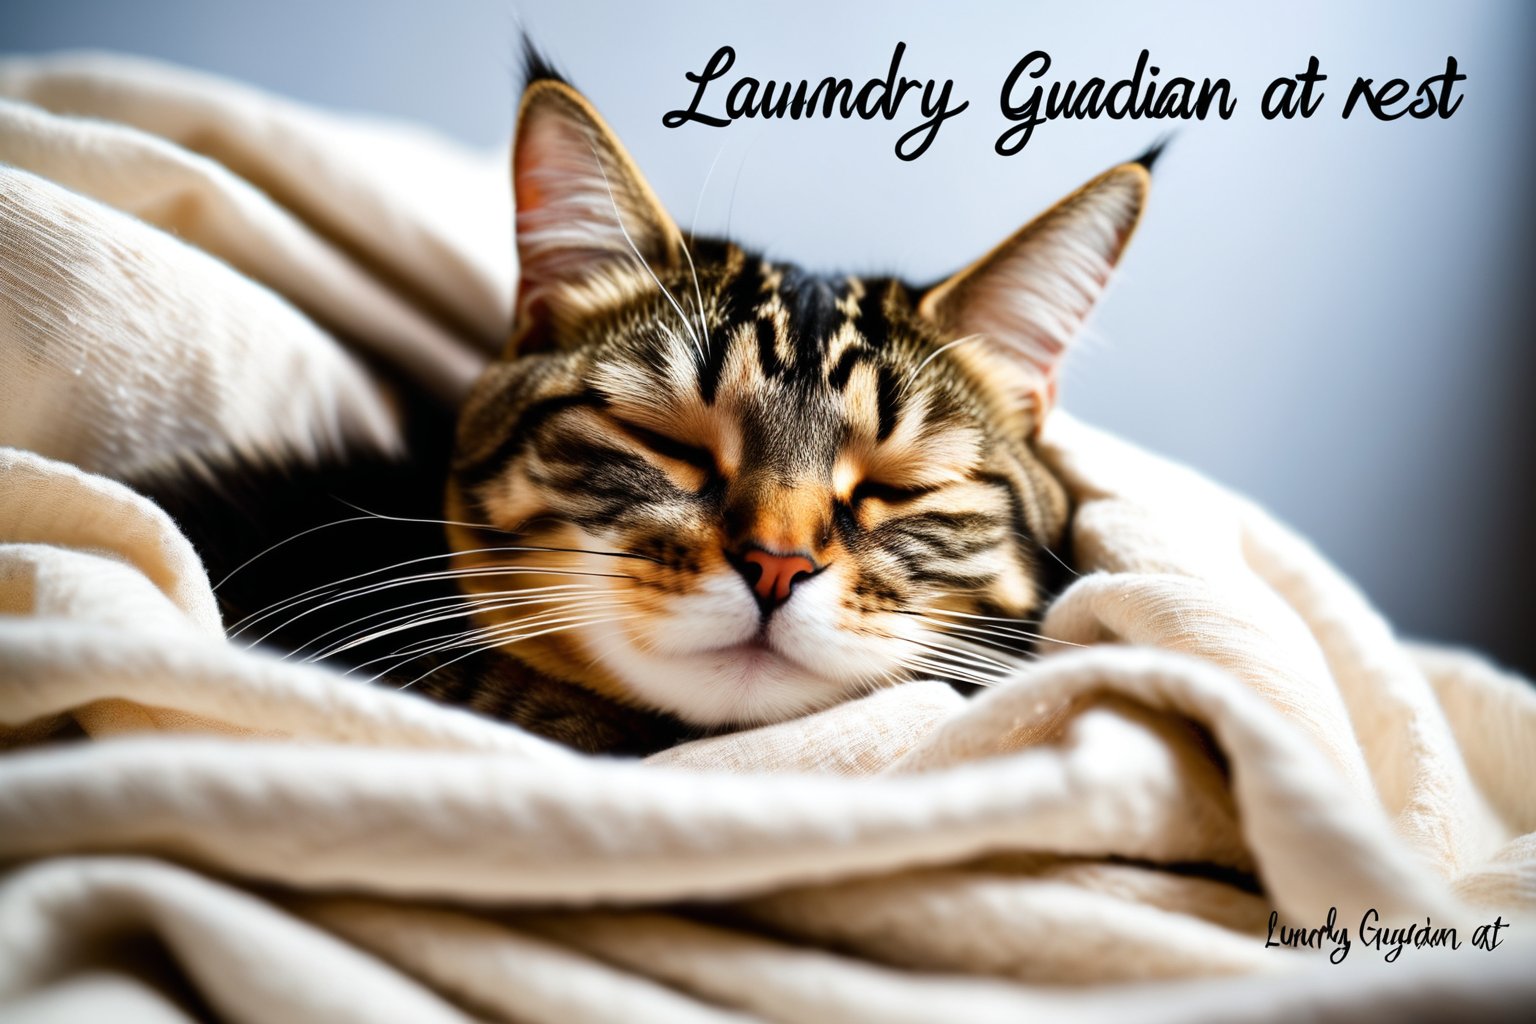 A picture of a cat sleeping in a pile of unfolded laundry with the text: "Laundry guardian at rest."